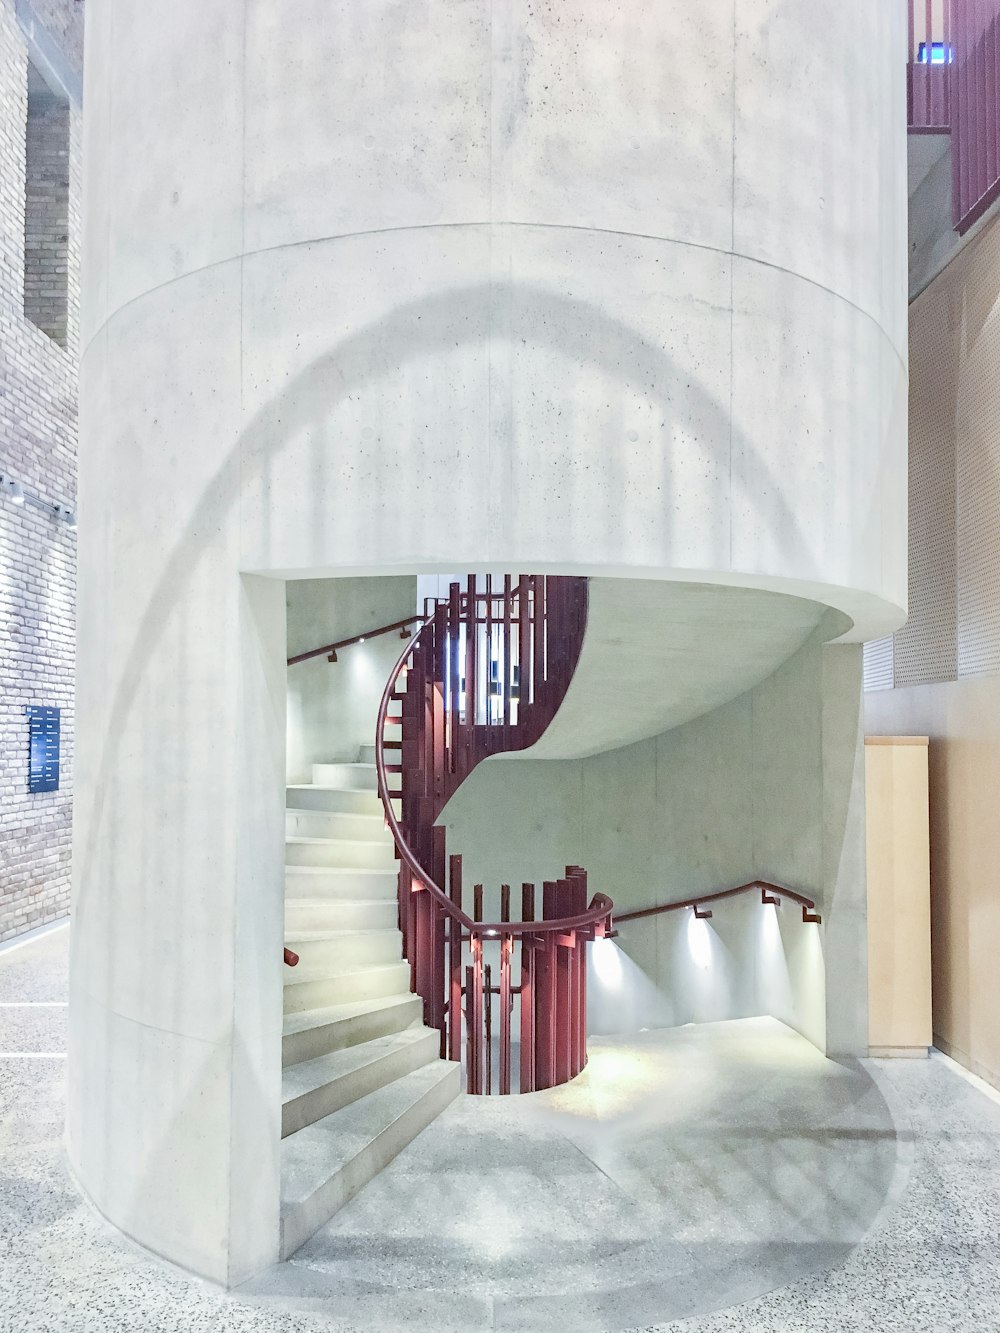 empty spiral stairs inside building